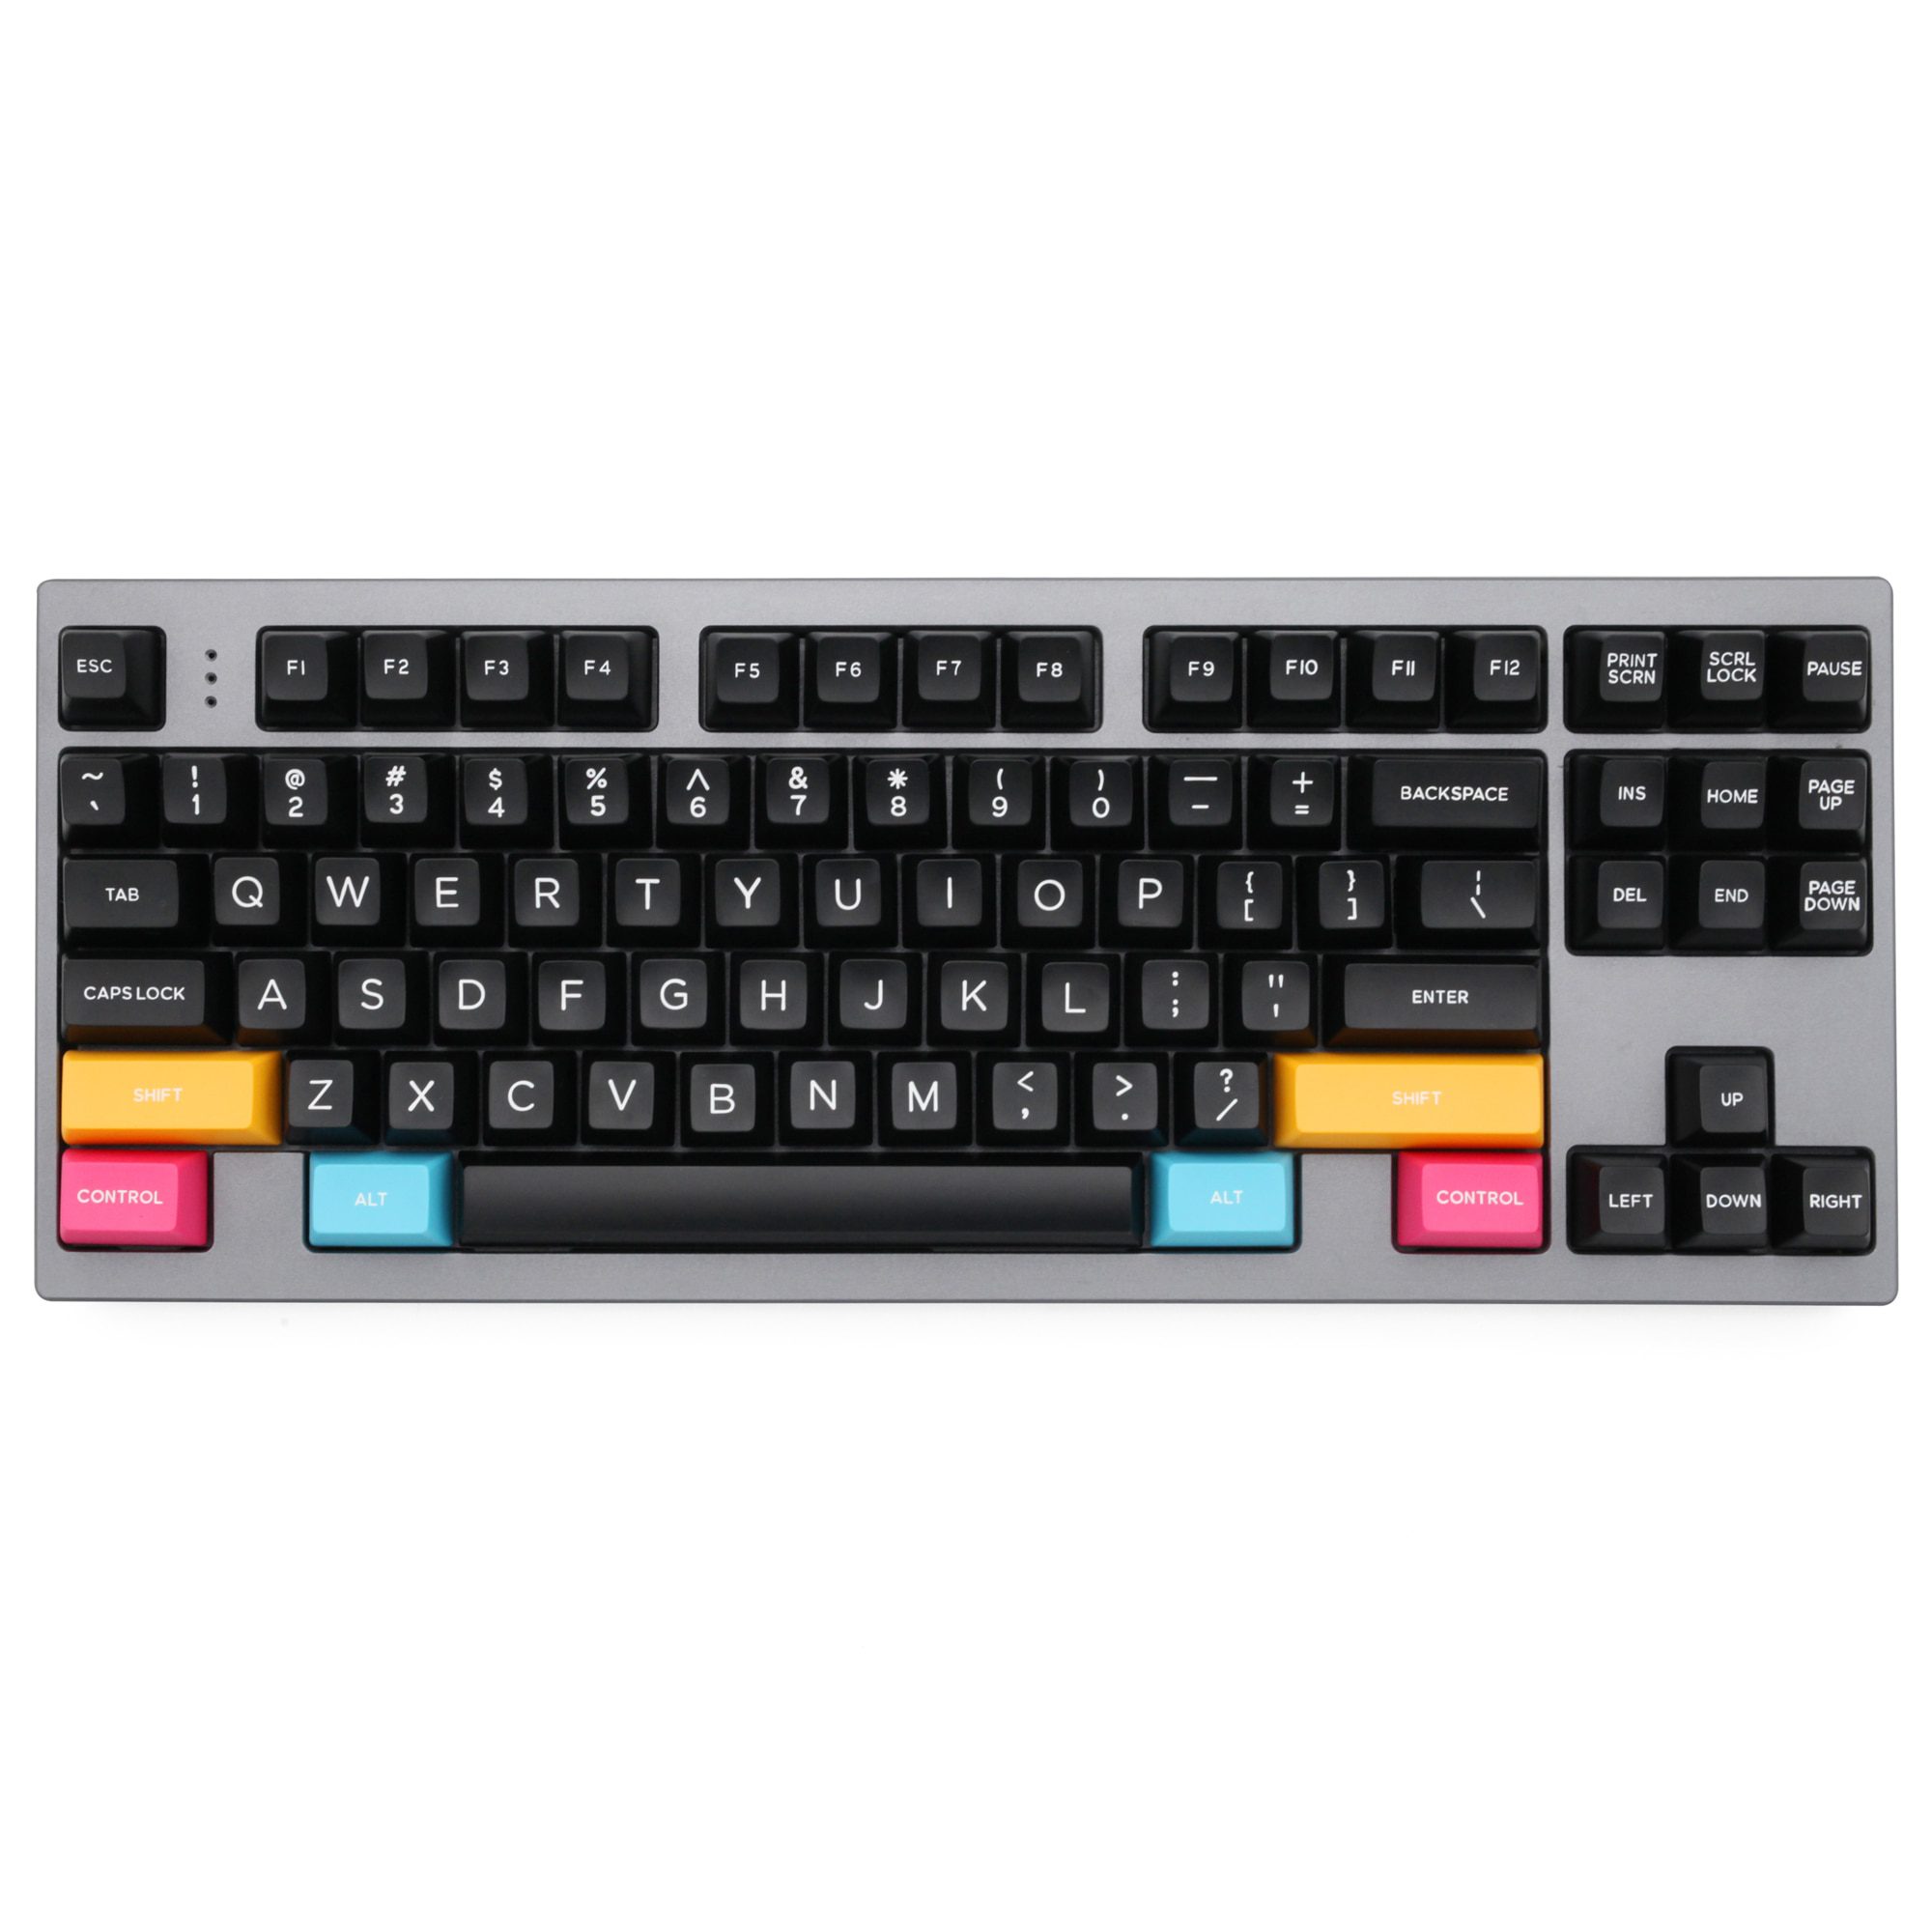 gk64x gk64 hot swappable 60% Wooden Case Custom Mechanical Keyboard Kit support rgb switch leds type c has software